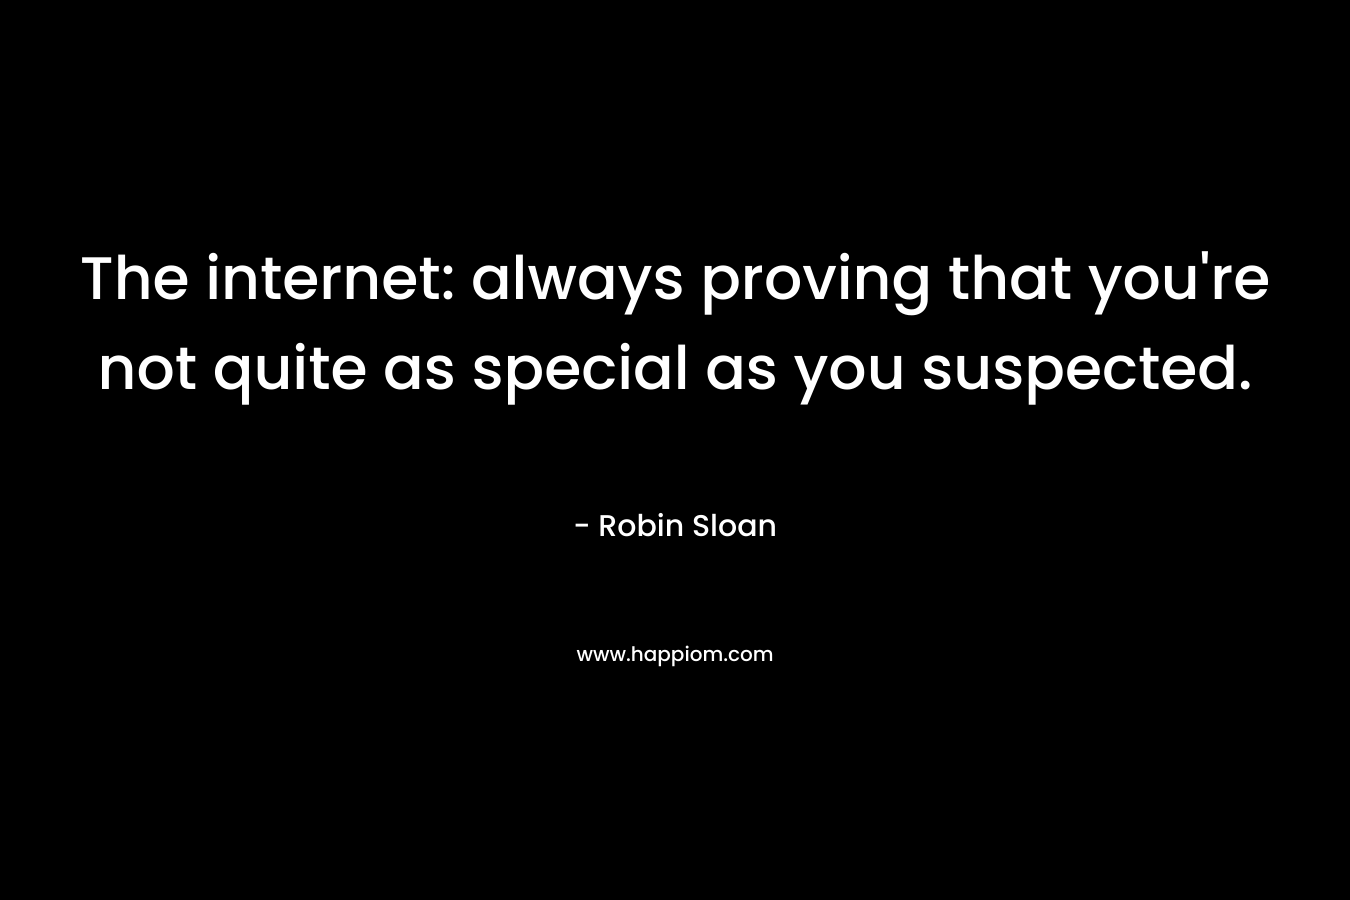 The internet: always proving that you’re not quite as special as you suspected. – Robin Sloan